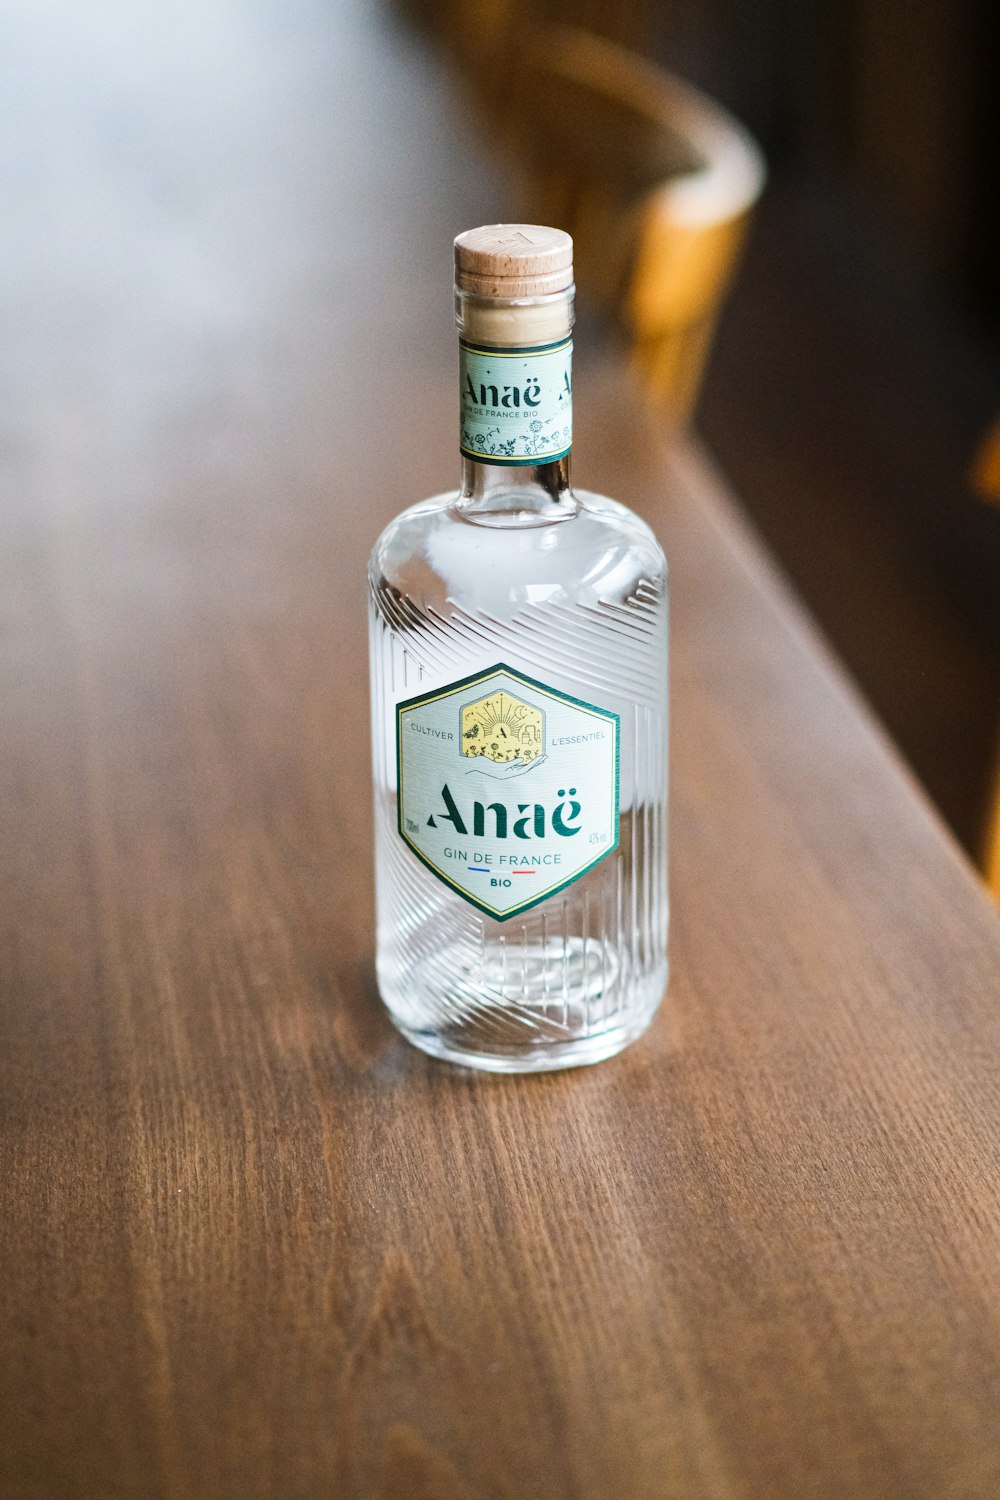 a bottle of anise on a wooden table